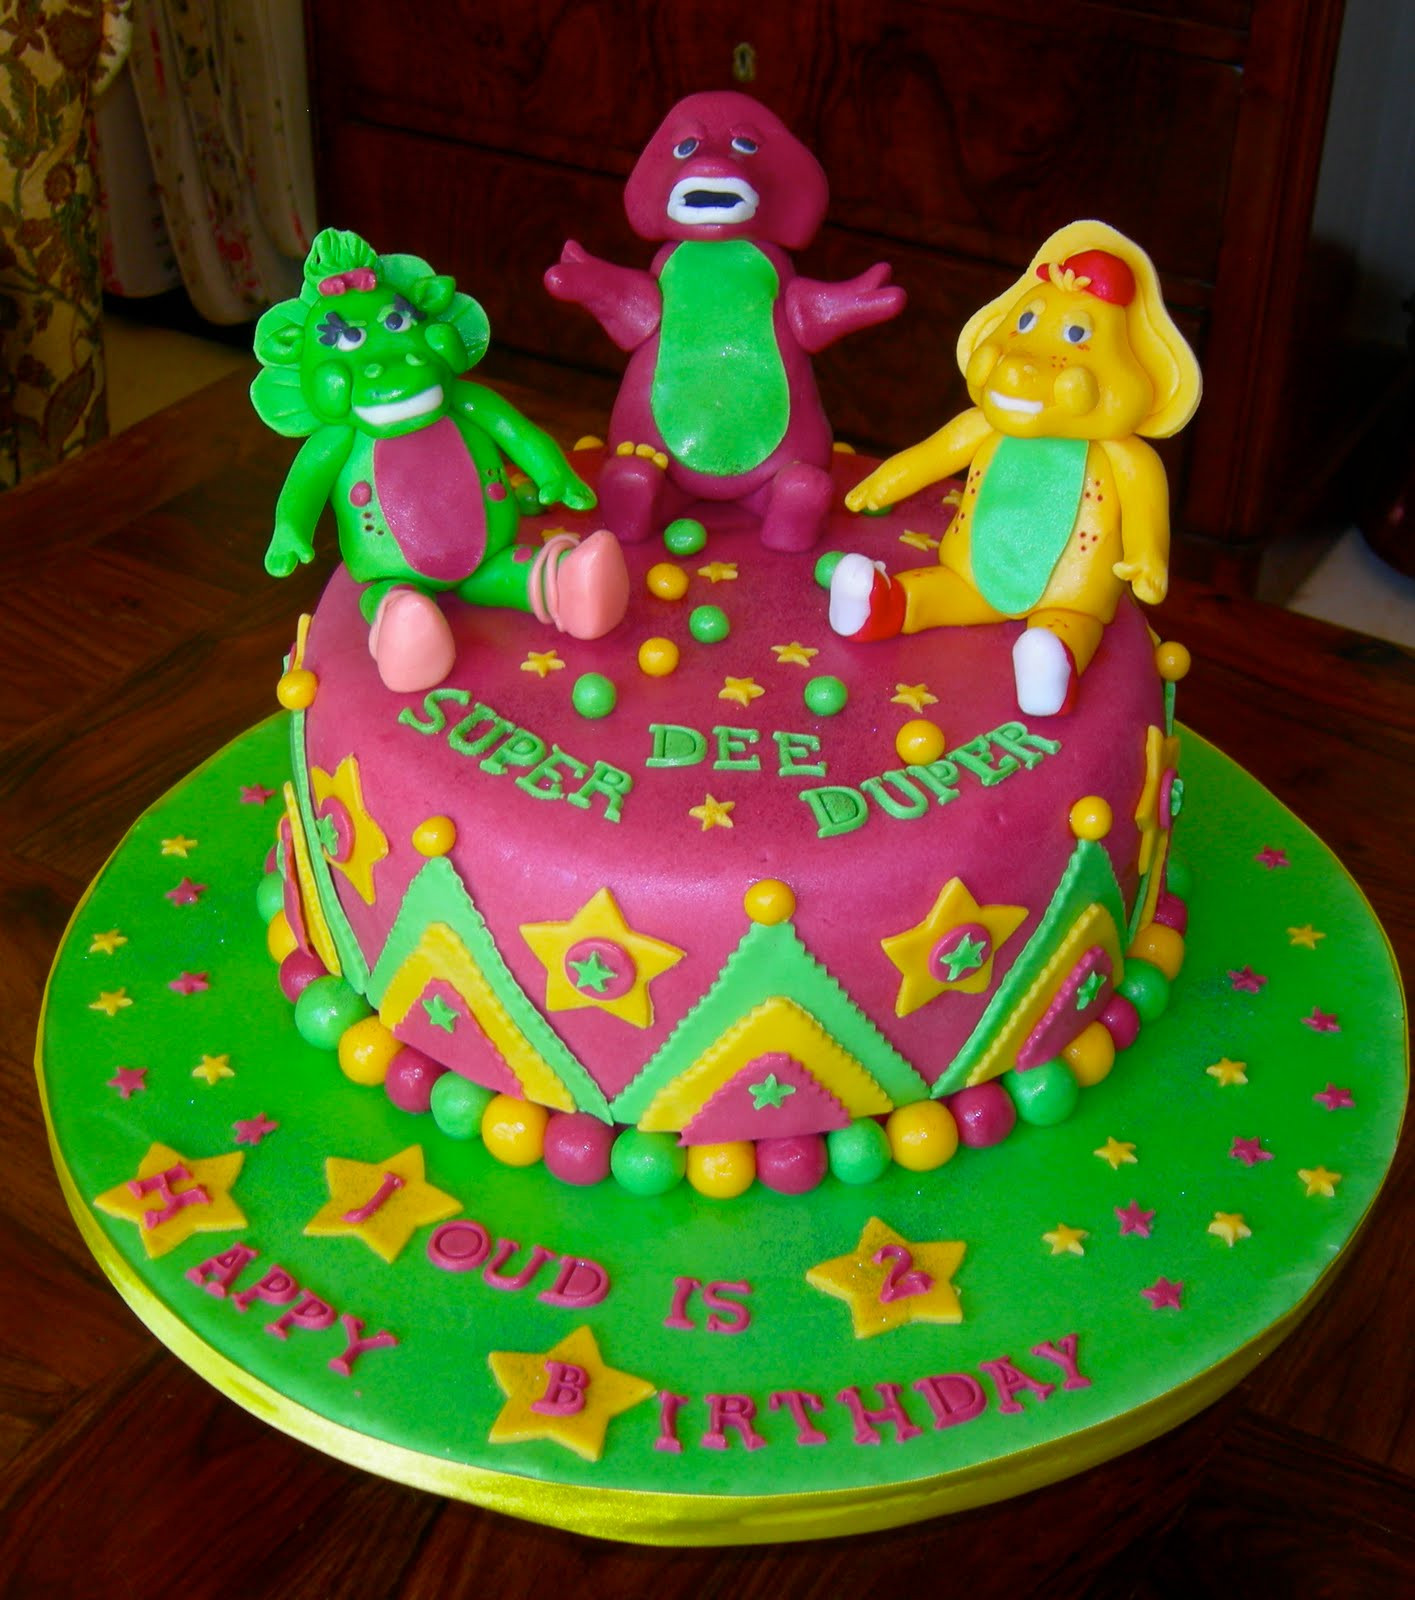 Barney Birthday Cake
 ANOTHER BARNEY AND FRIENDS CAKE